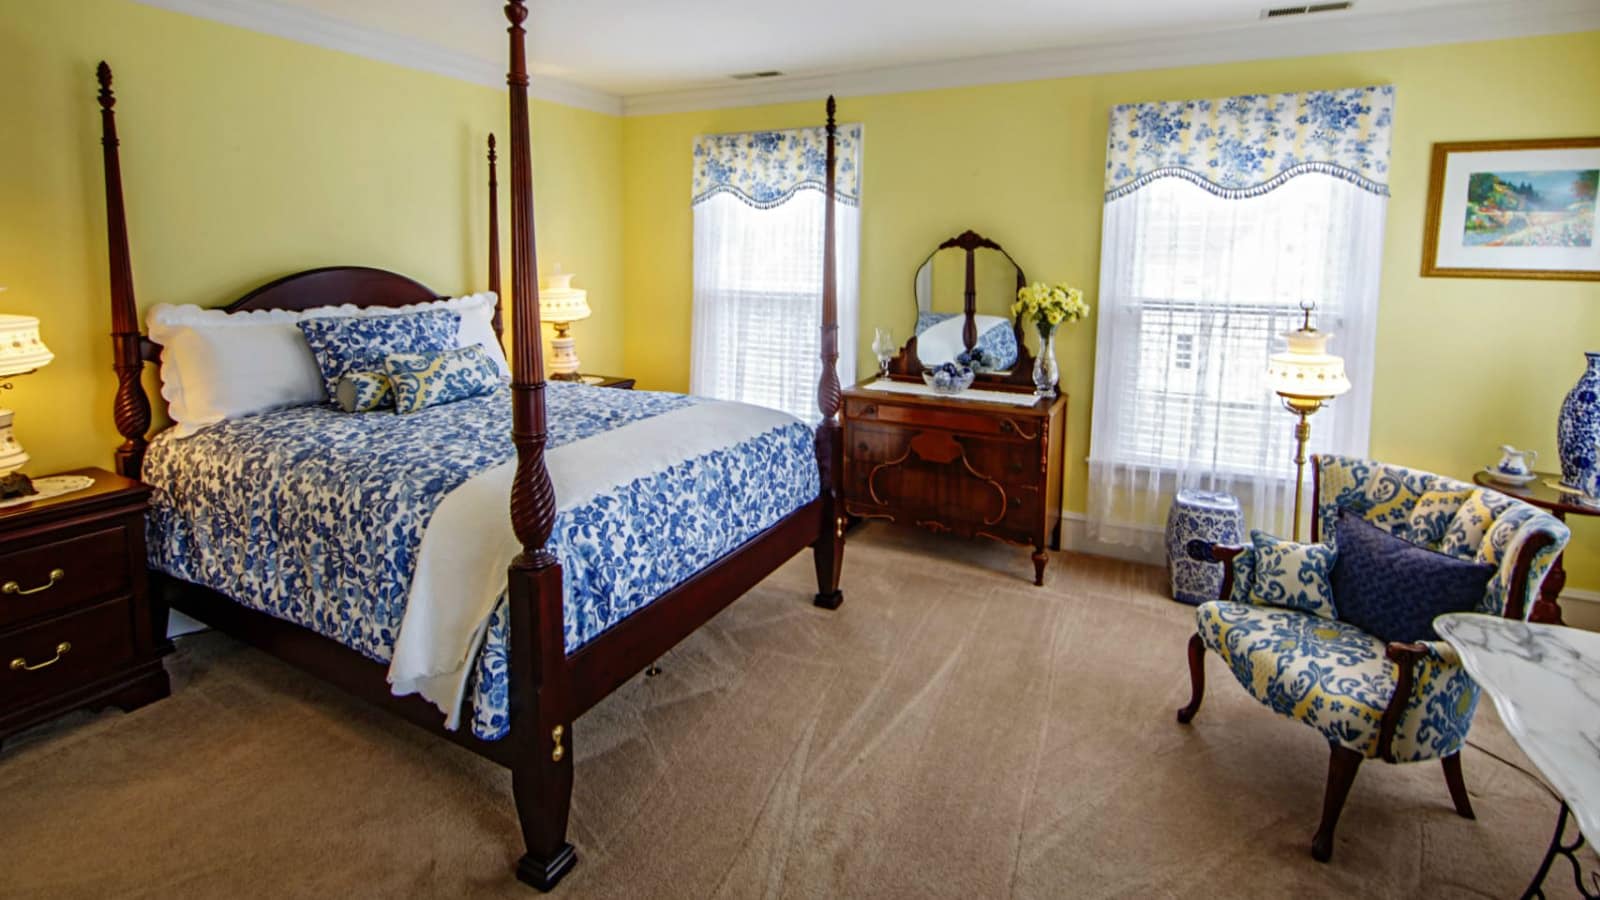 Bedroom with yellow walls, carpeting, dark wood four poster bed, blue multicolored bedding, dark wooden dresser, and upholstered and wooden antique chair